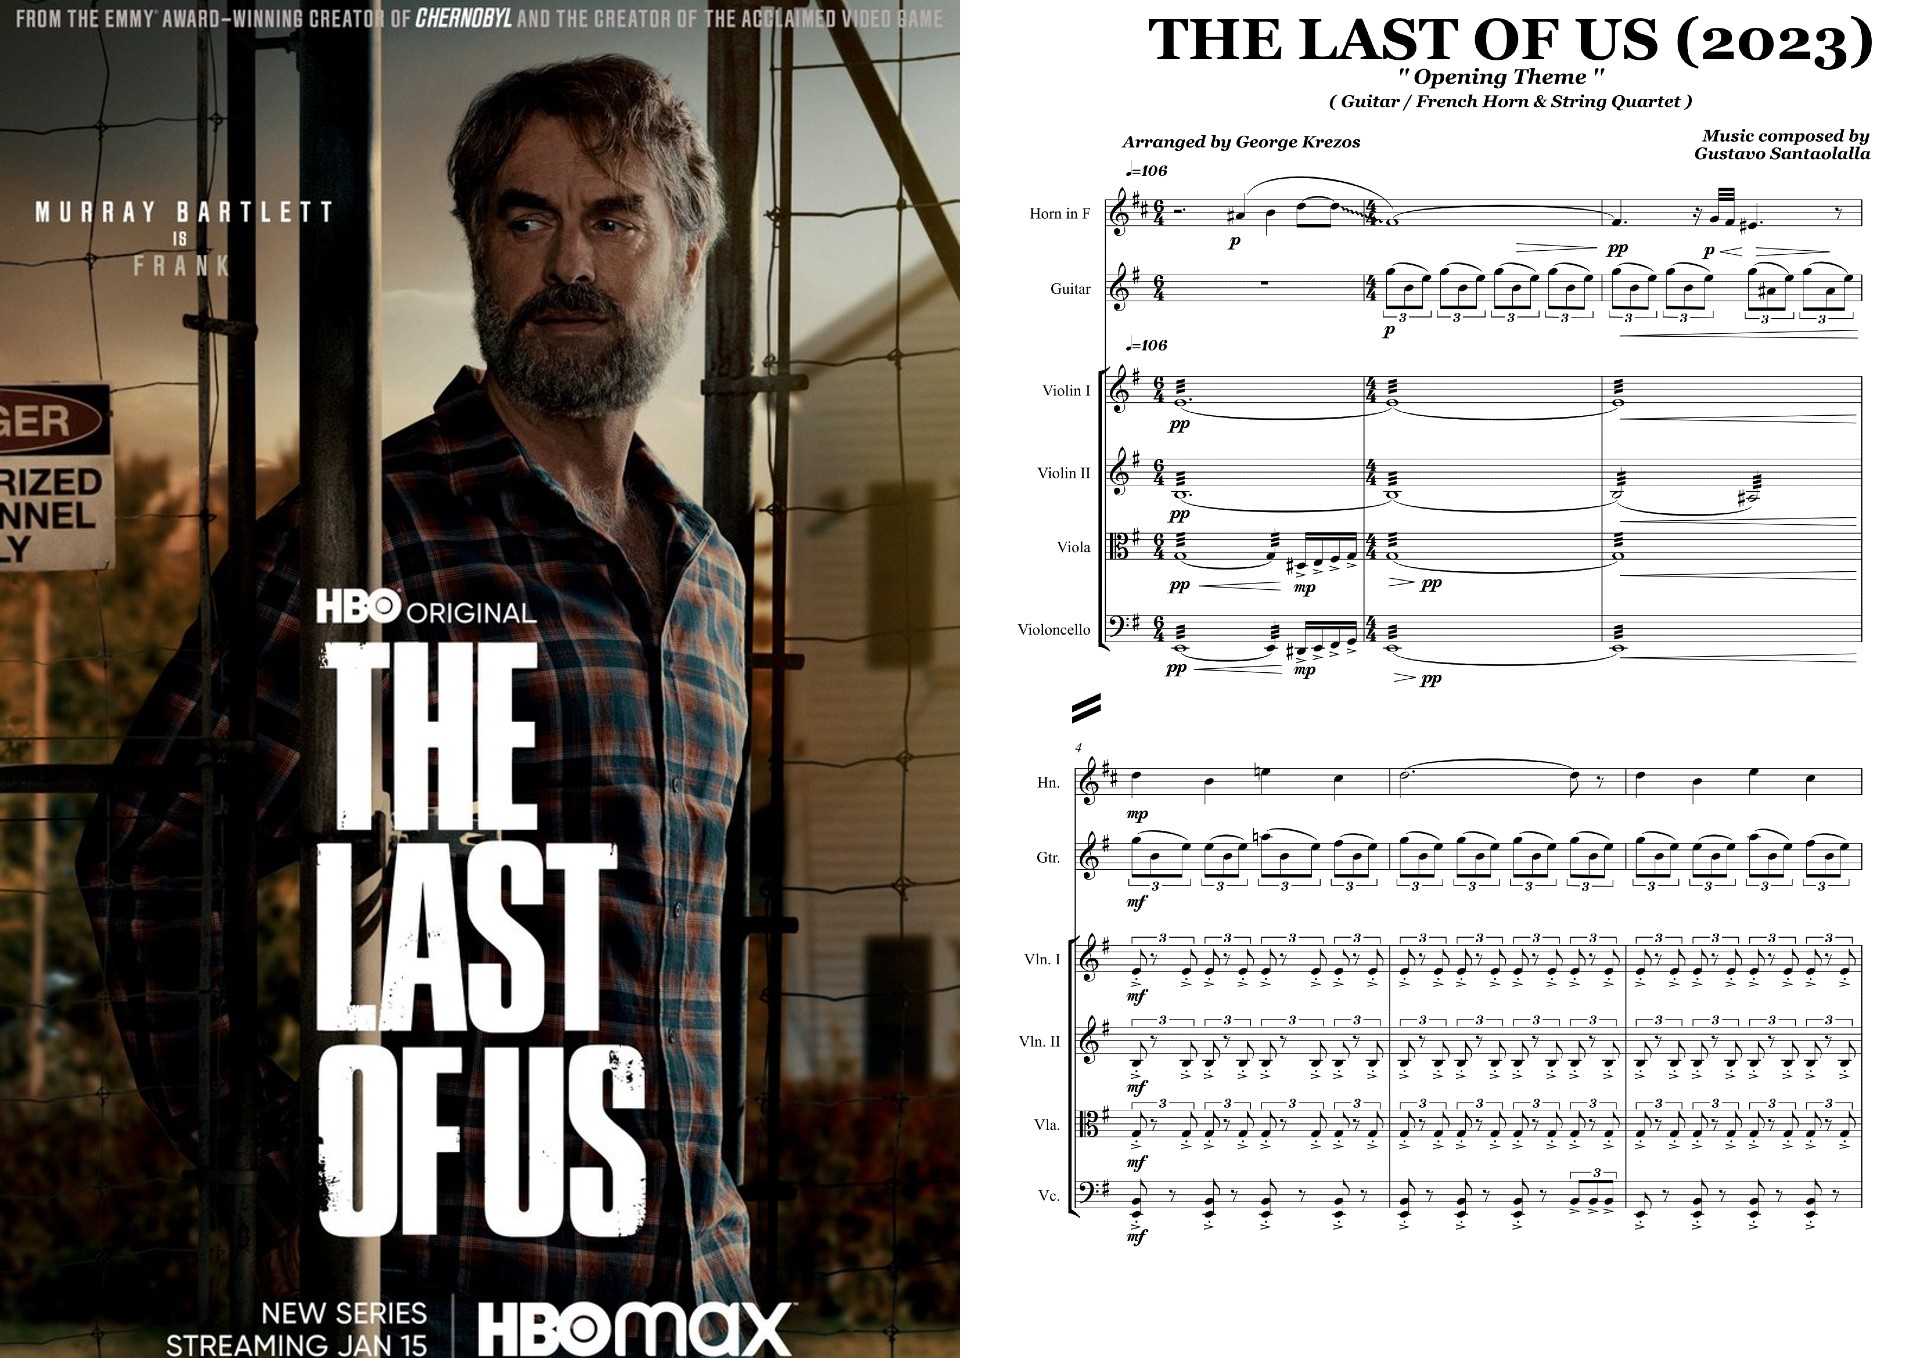 THE LAST OF US - Opening Theme (orchestral).jpg